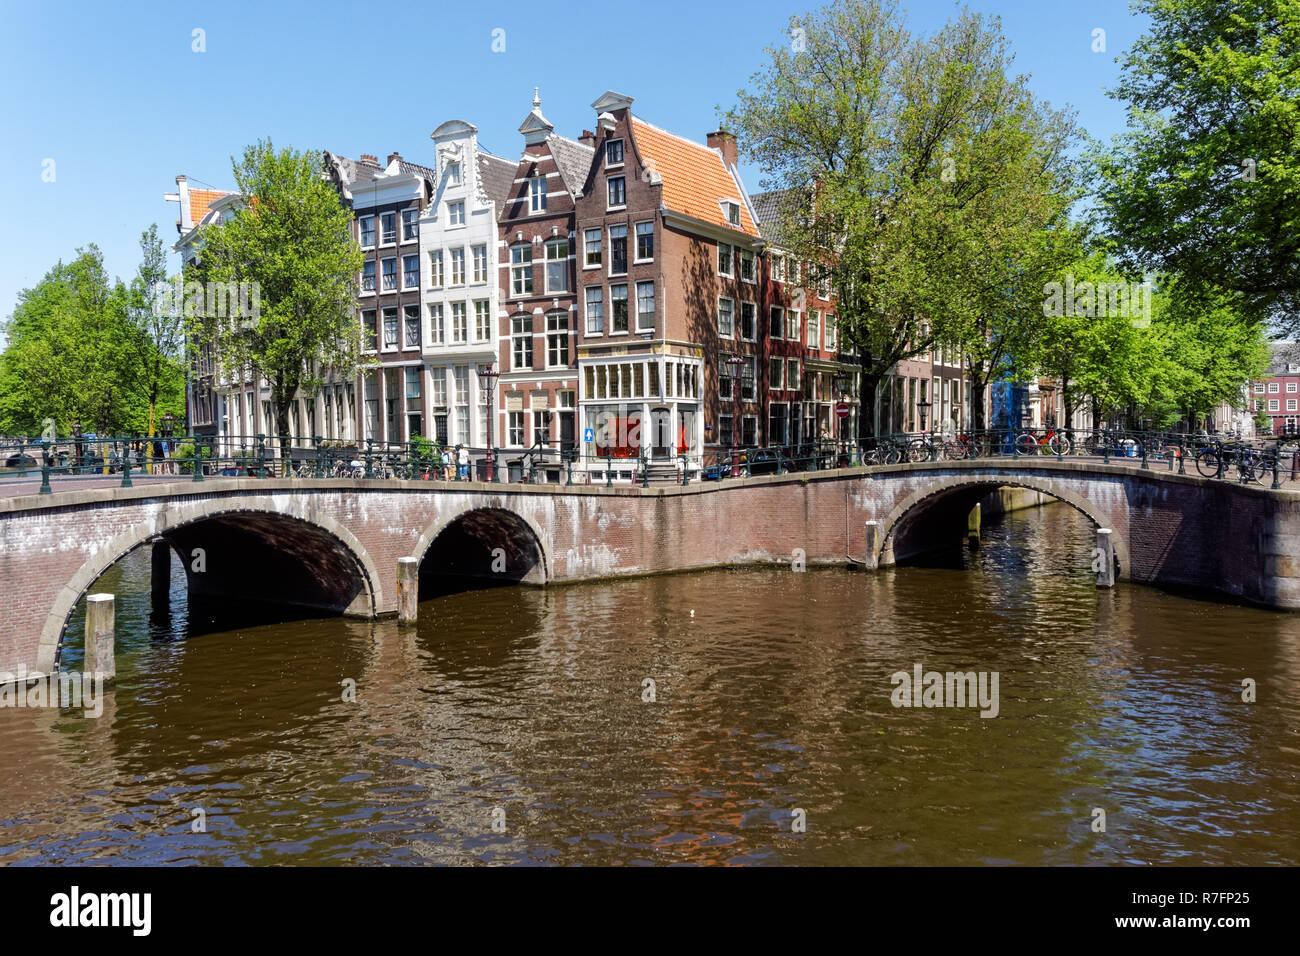 Traditional Dutch townhouses at Keizersgracht canal in Amsterdam, Netherlands Stock Photo